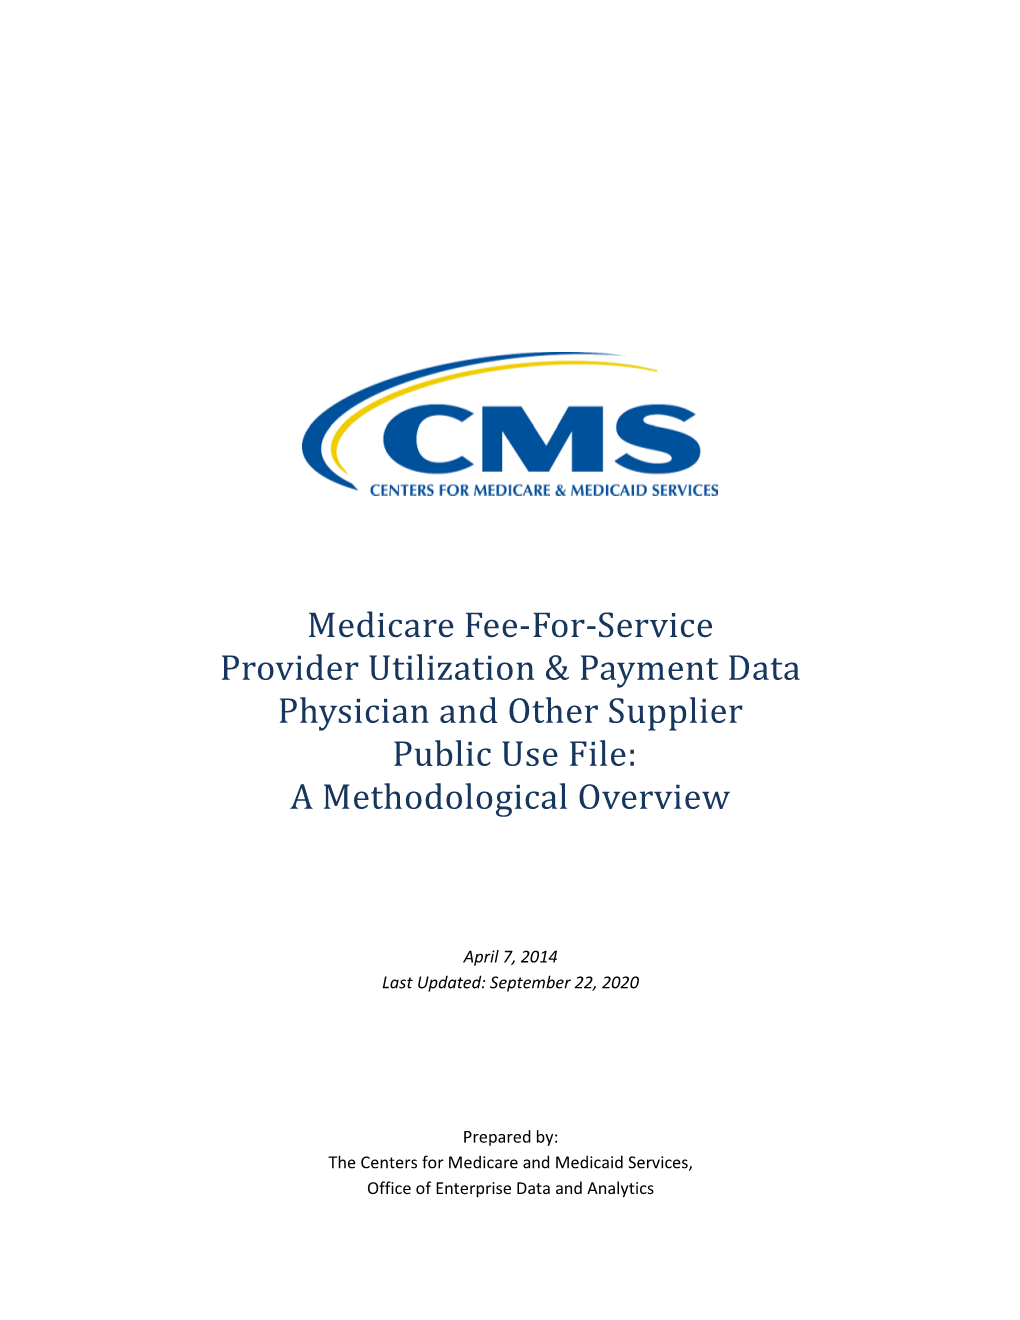 Medicare Fee-For-Service Provider Utilization & Payment Data